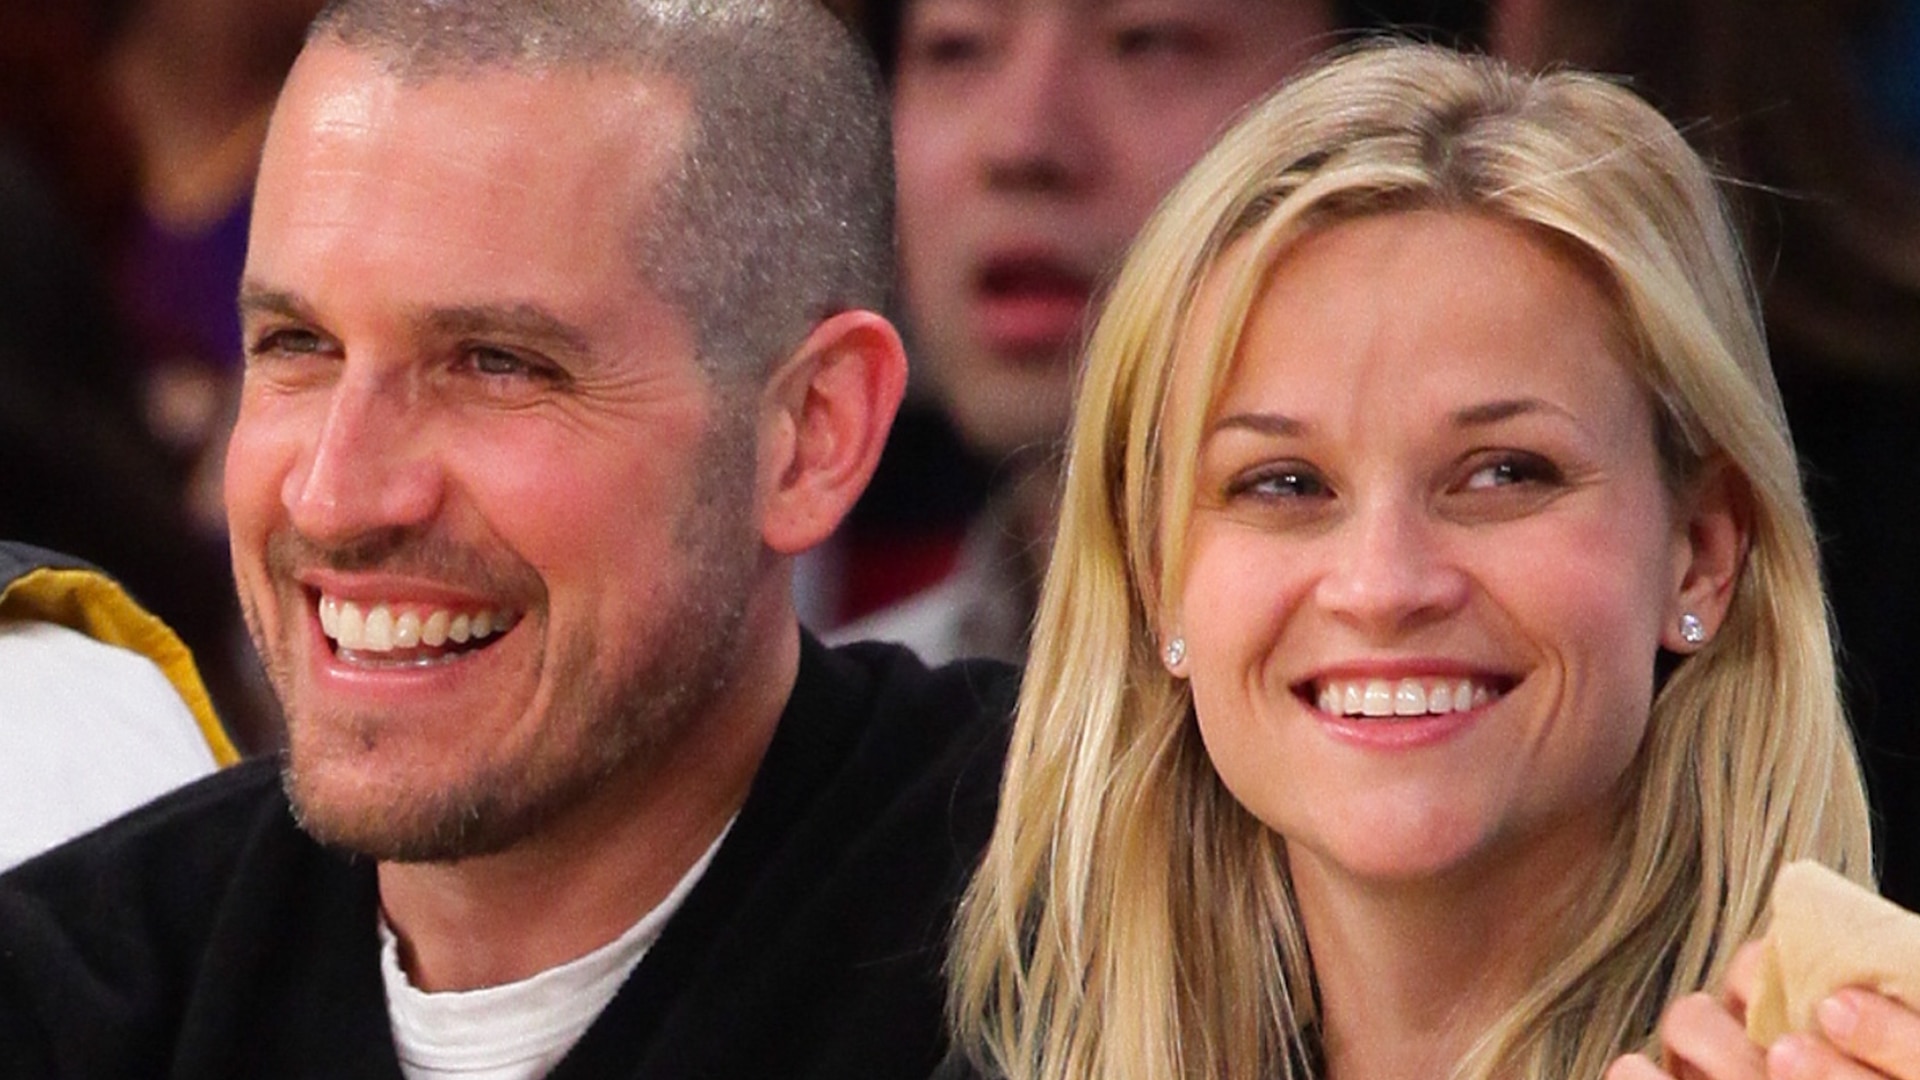 210326_4334626_Reese_Witherspoon_Gushes_Over_Hubby_Jim_Toth.jpg